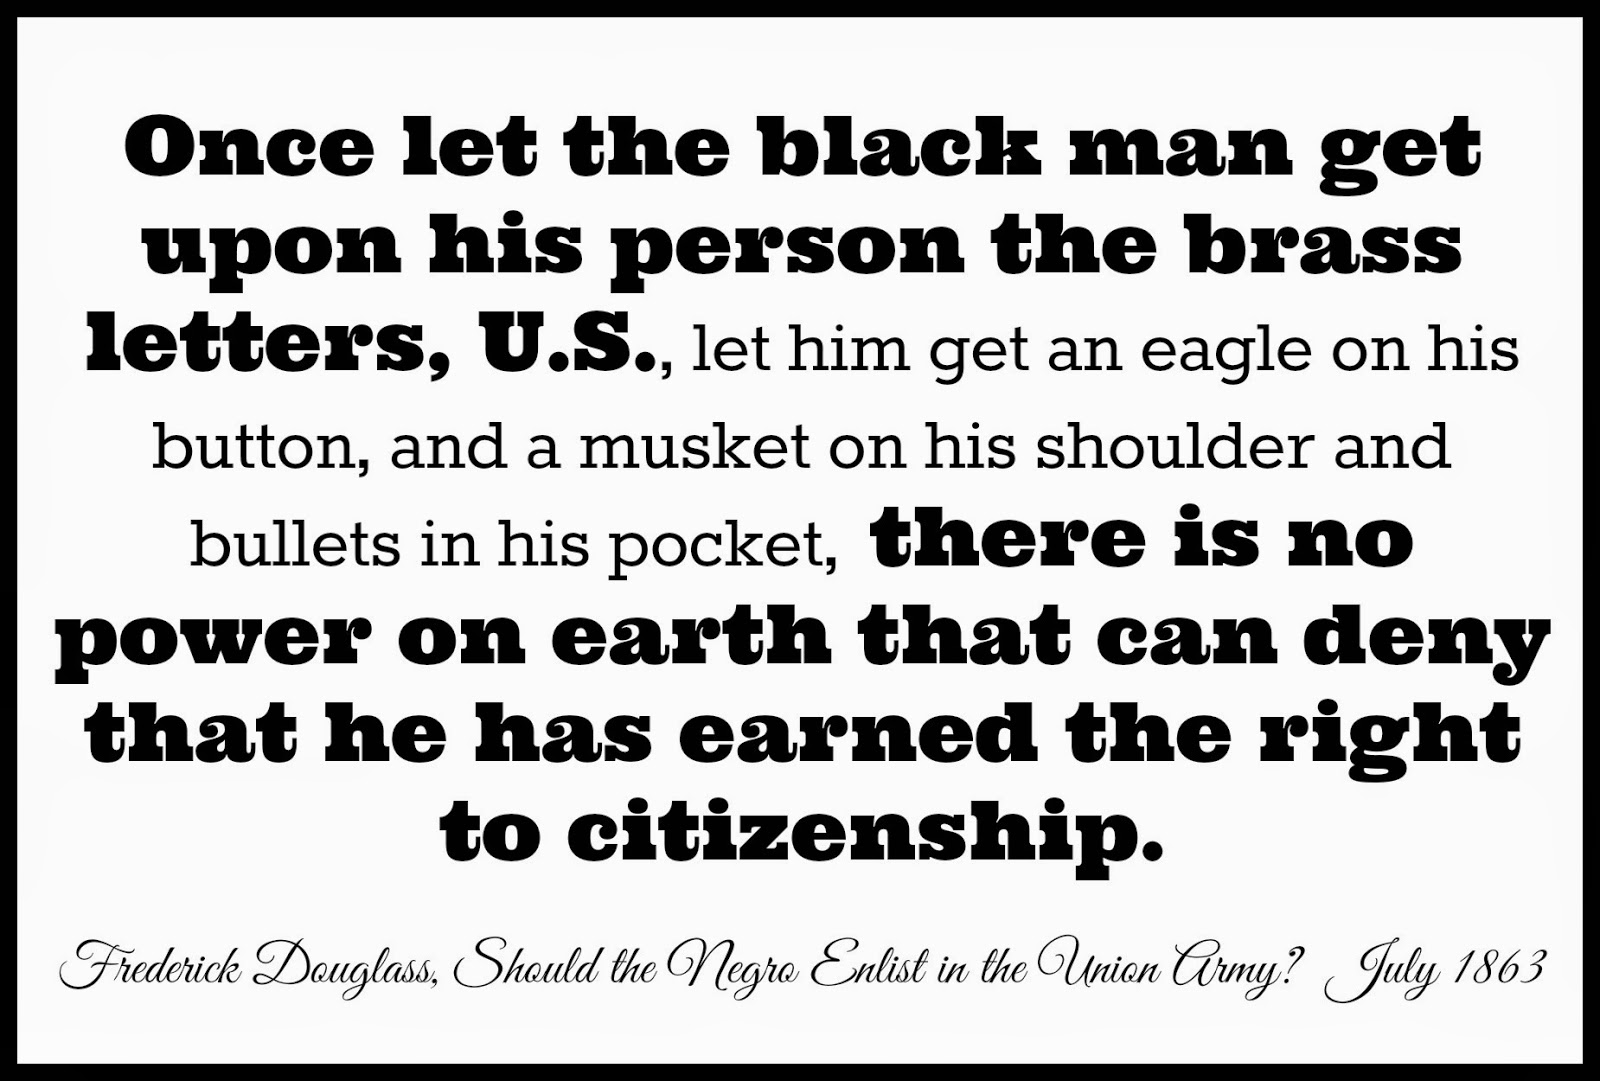 Once let the black man get upon his person the brass letters, U.S., there is no power on earth that can deny that he has earned the right to citizenship. Fredrick Douglass, Should the Negro Enlist in the Union Army?, July 1863